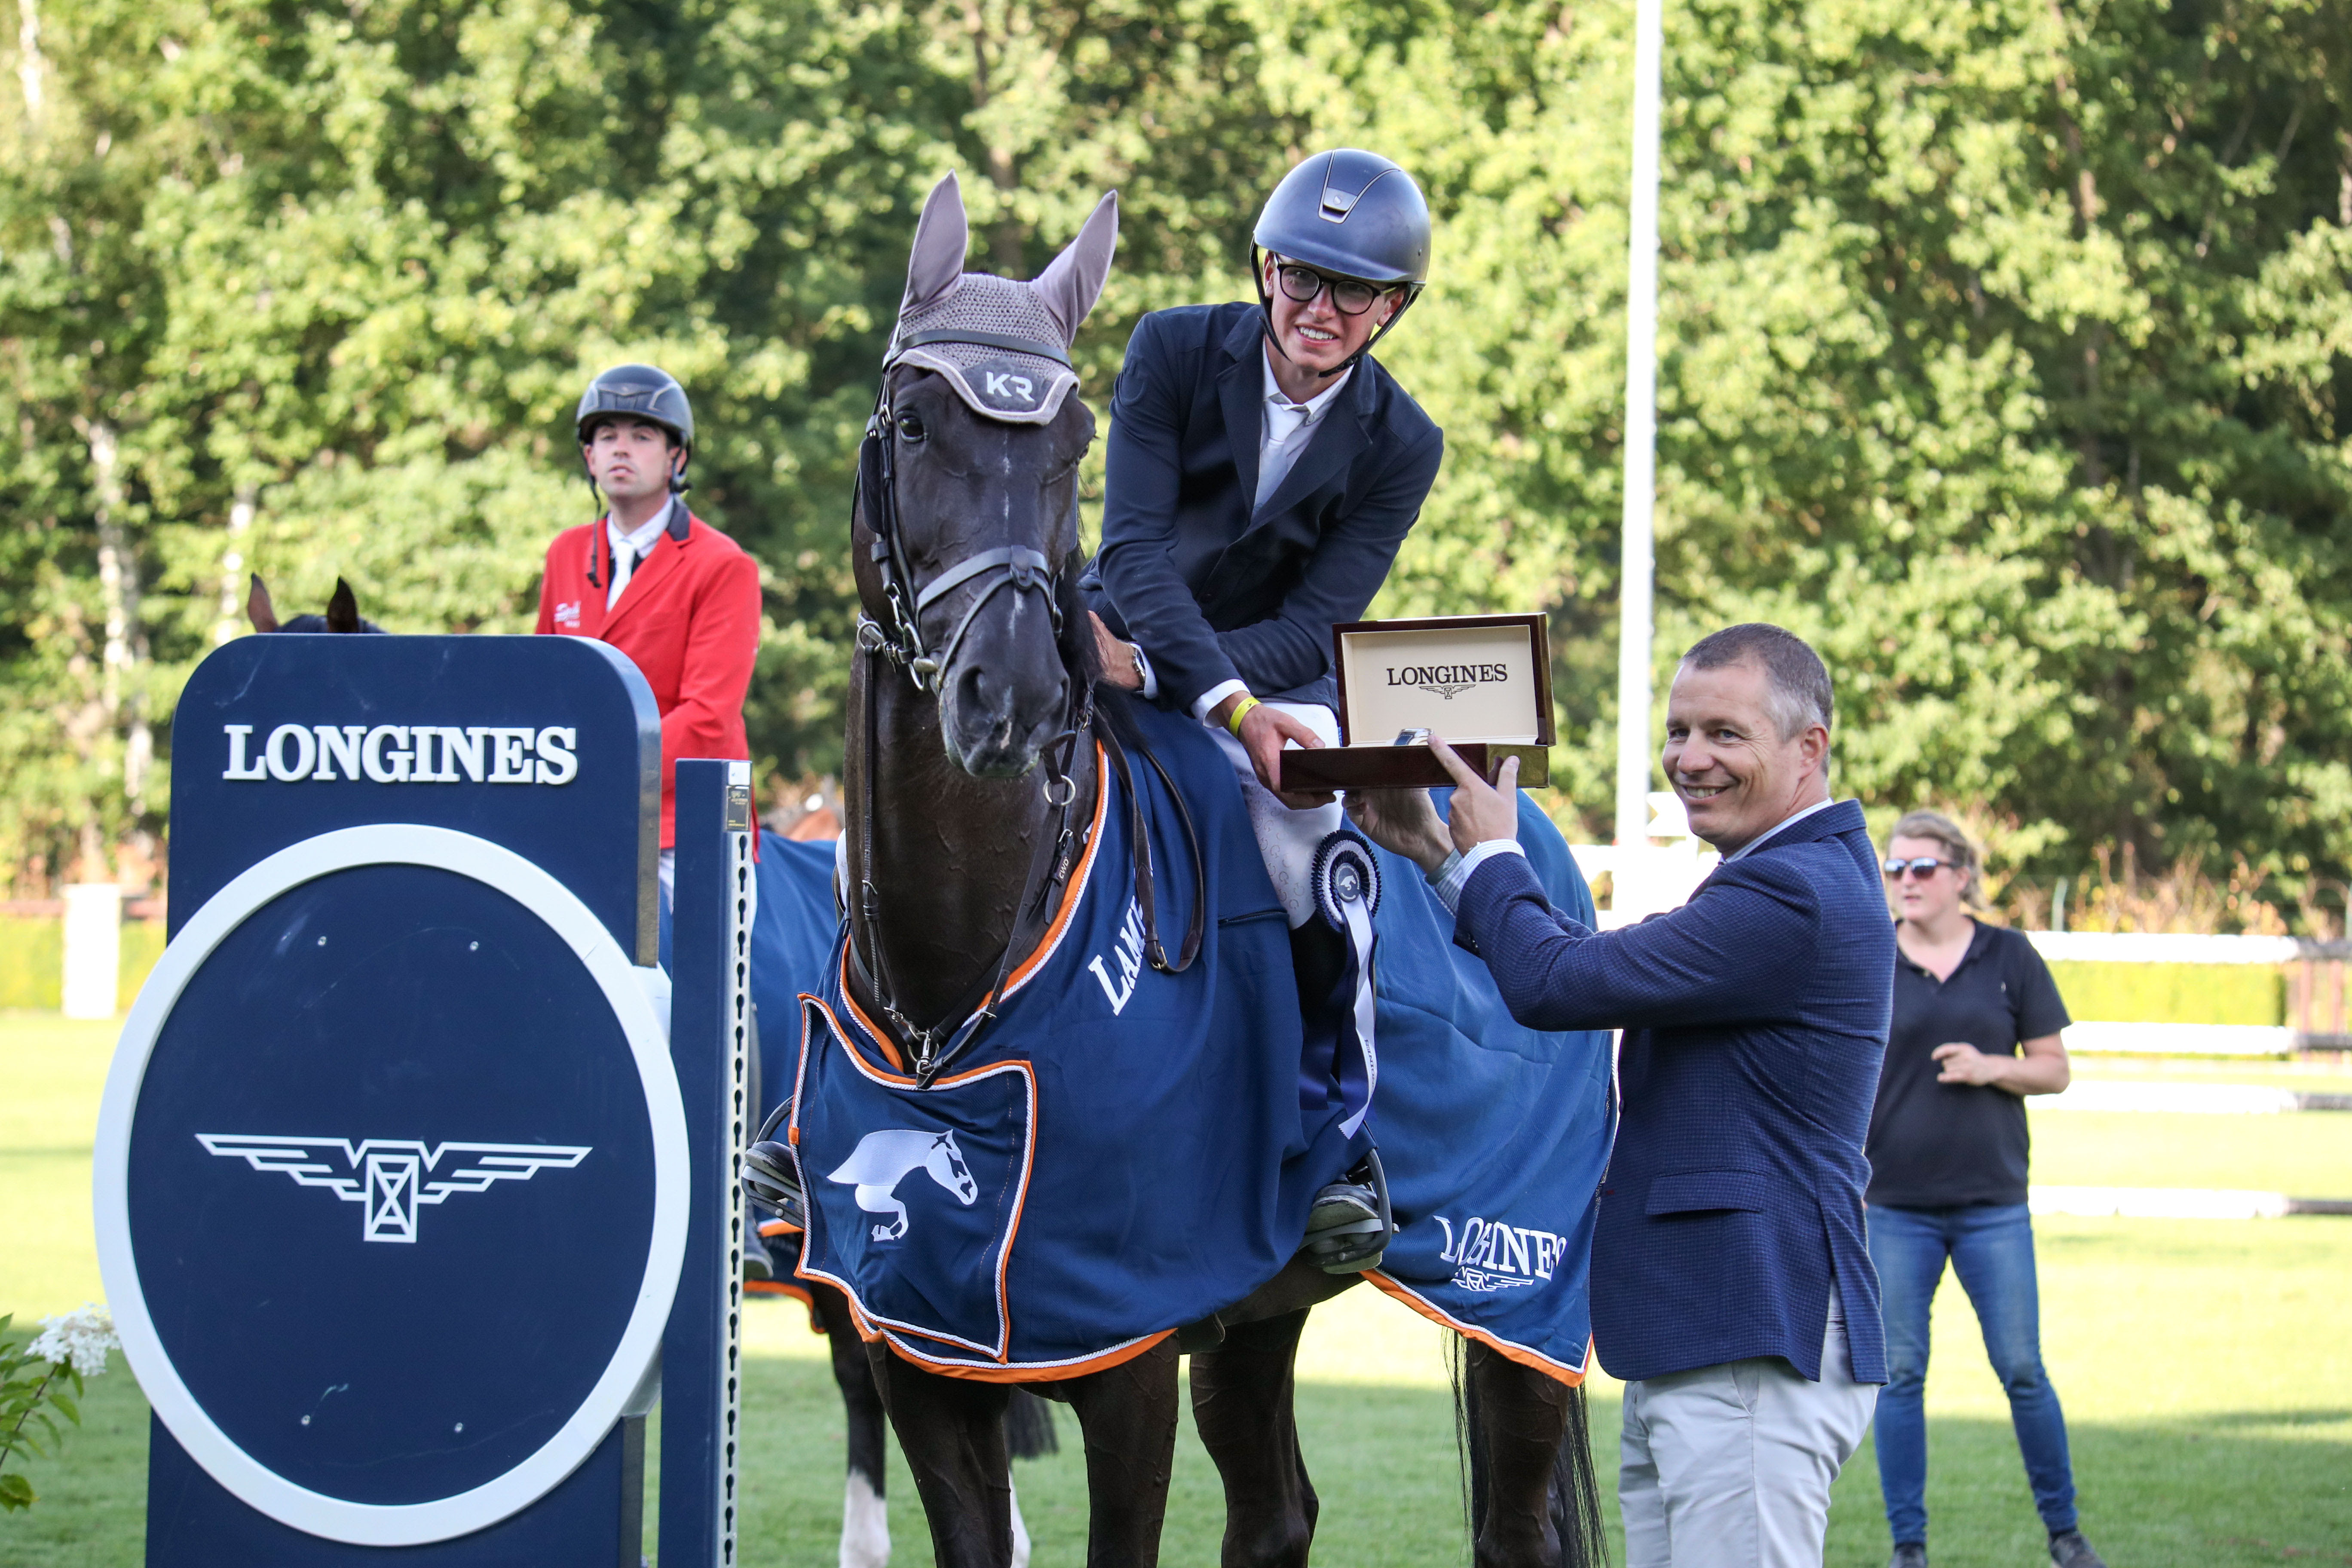 Epic finish to final day of young talent showcase at Longines Global Future Champions